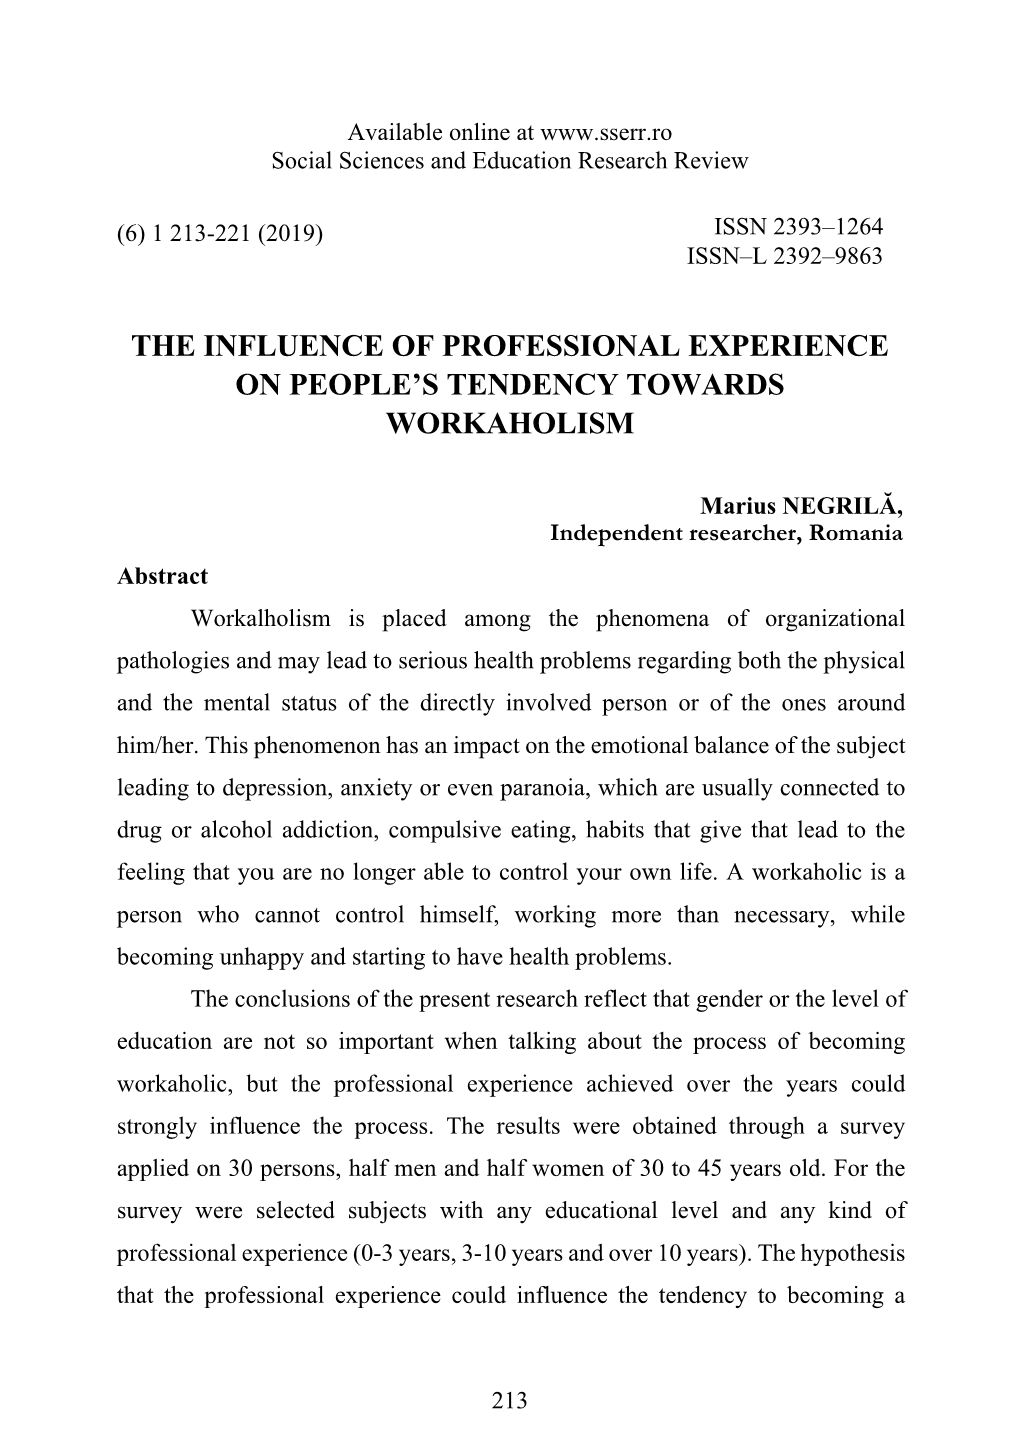 The Influence of Professional Experience on People's Tendency